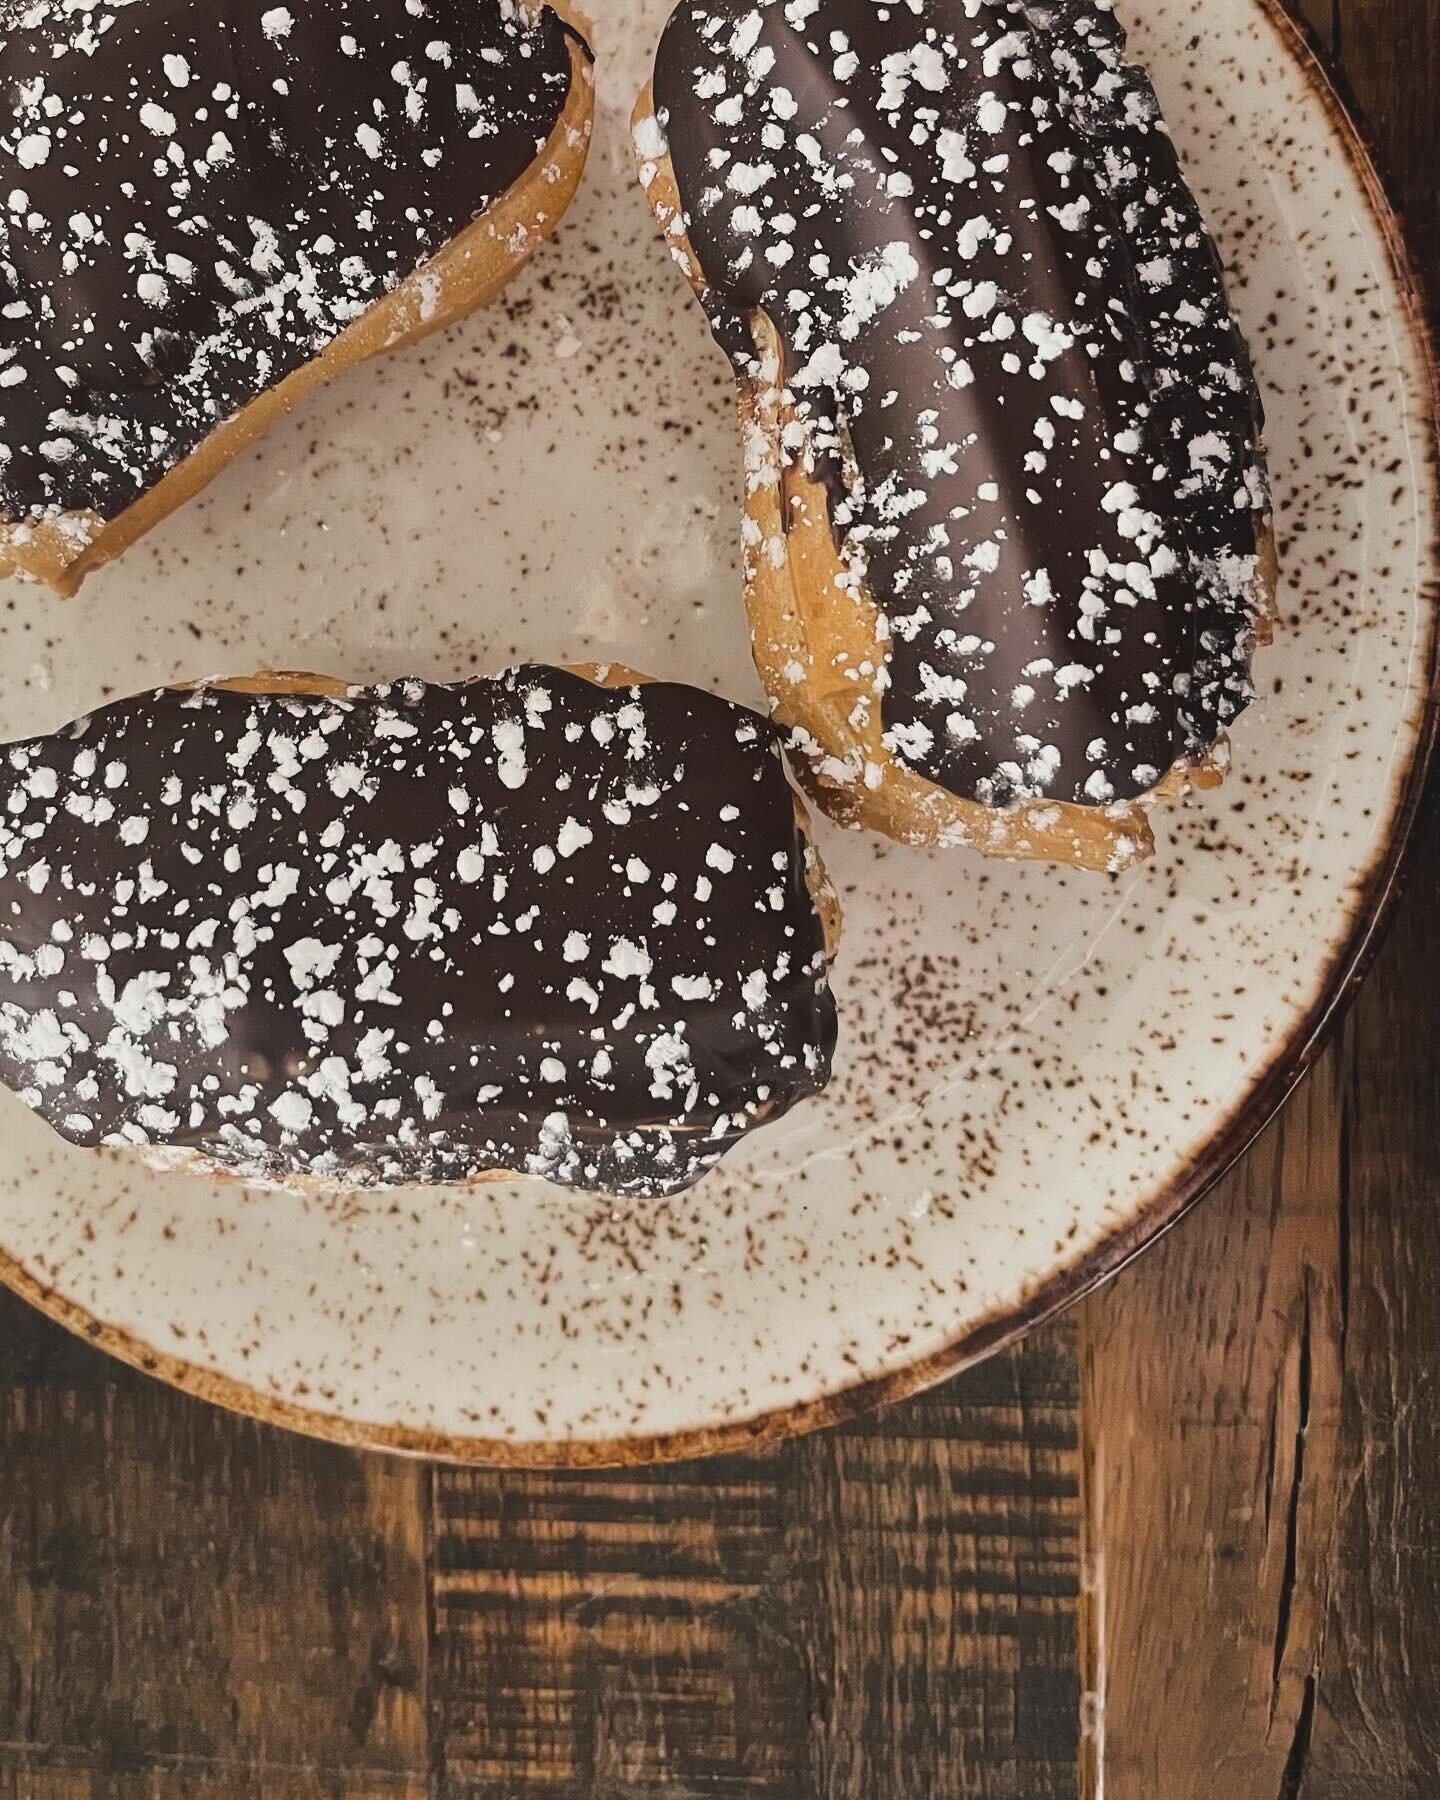 &Eacute;clairs! A tasty trio of pastry puffs filled with cream &amp; frosted with house made chocolate icing. Does it get any better? Only on special tonight! #dontmissit #illtaketwo 

@seganmilverstein BACK AT IT AGAIN. #dessertgang 

📸 @qwertyluv 